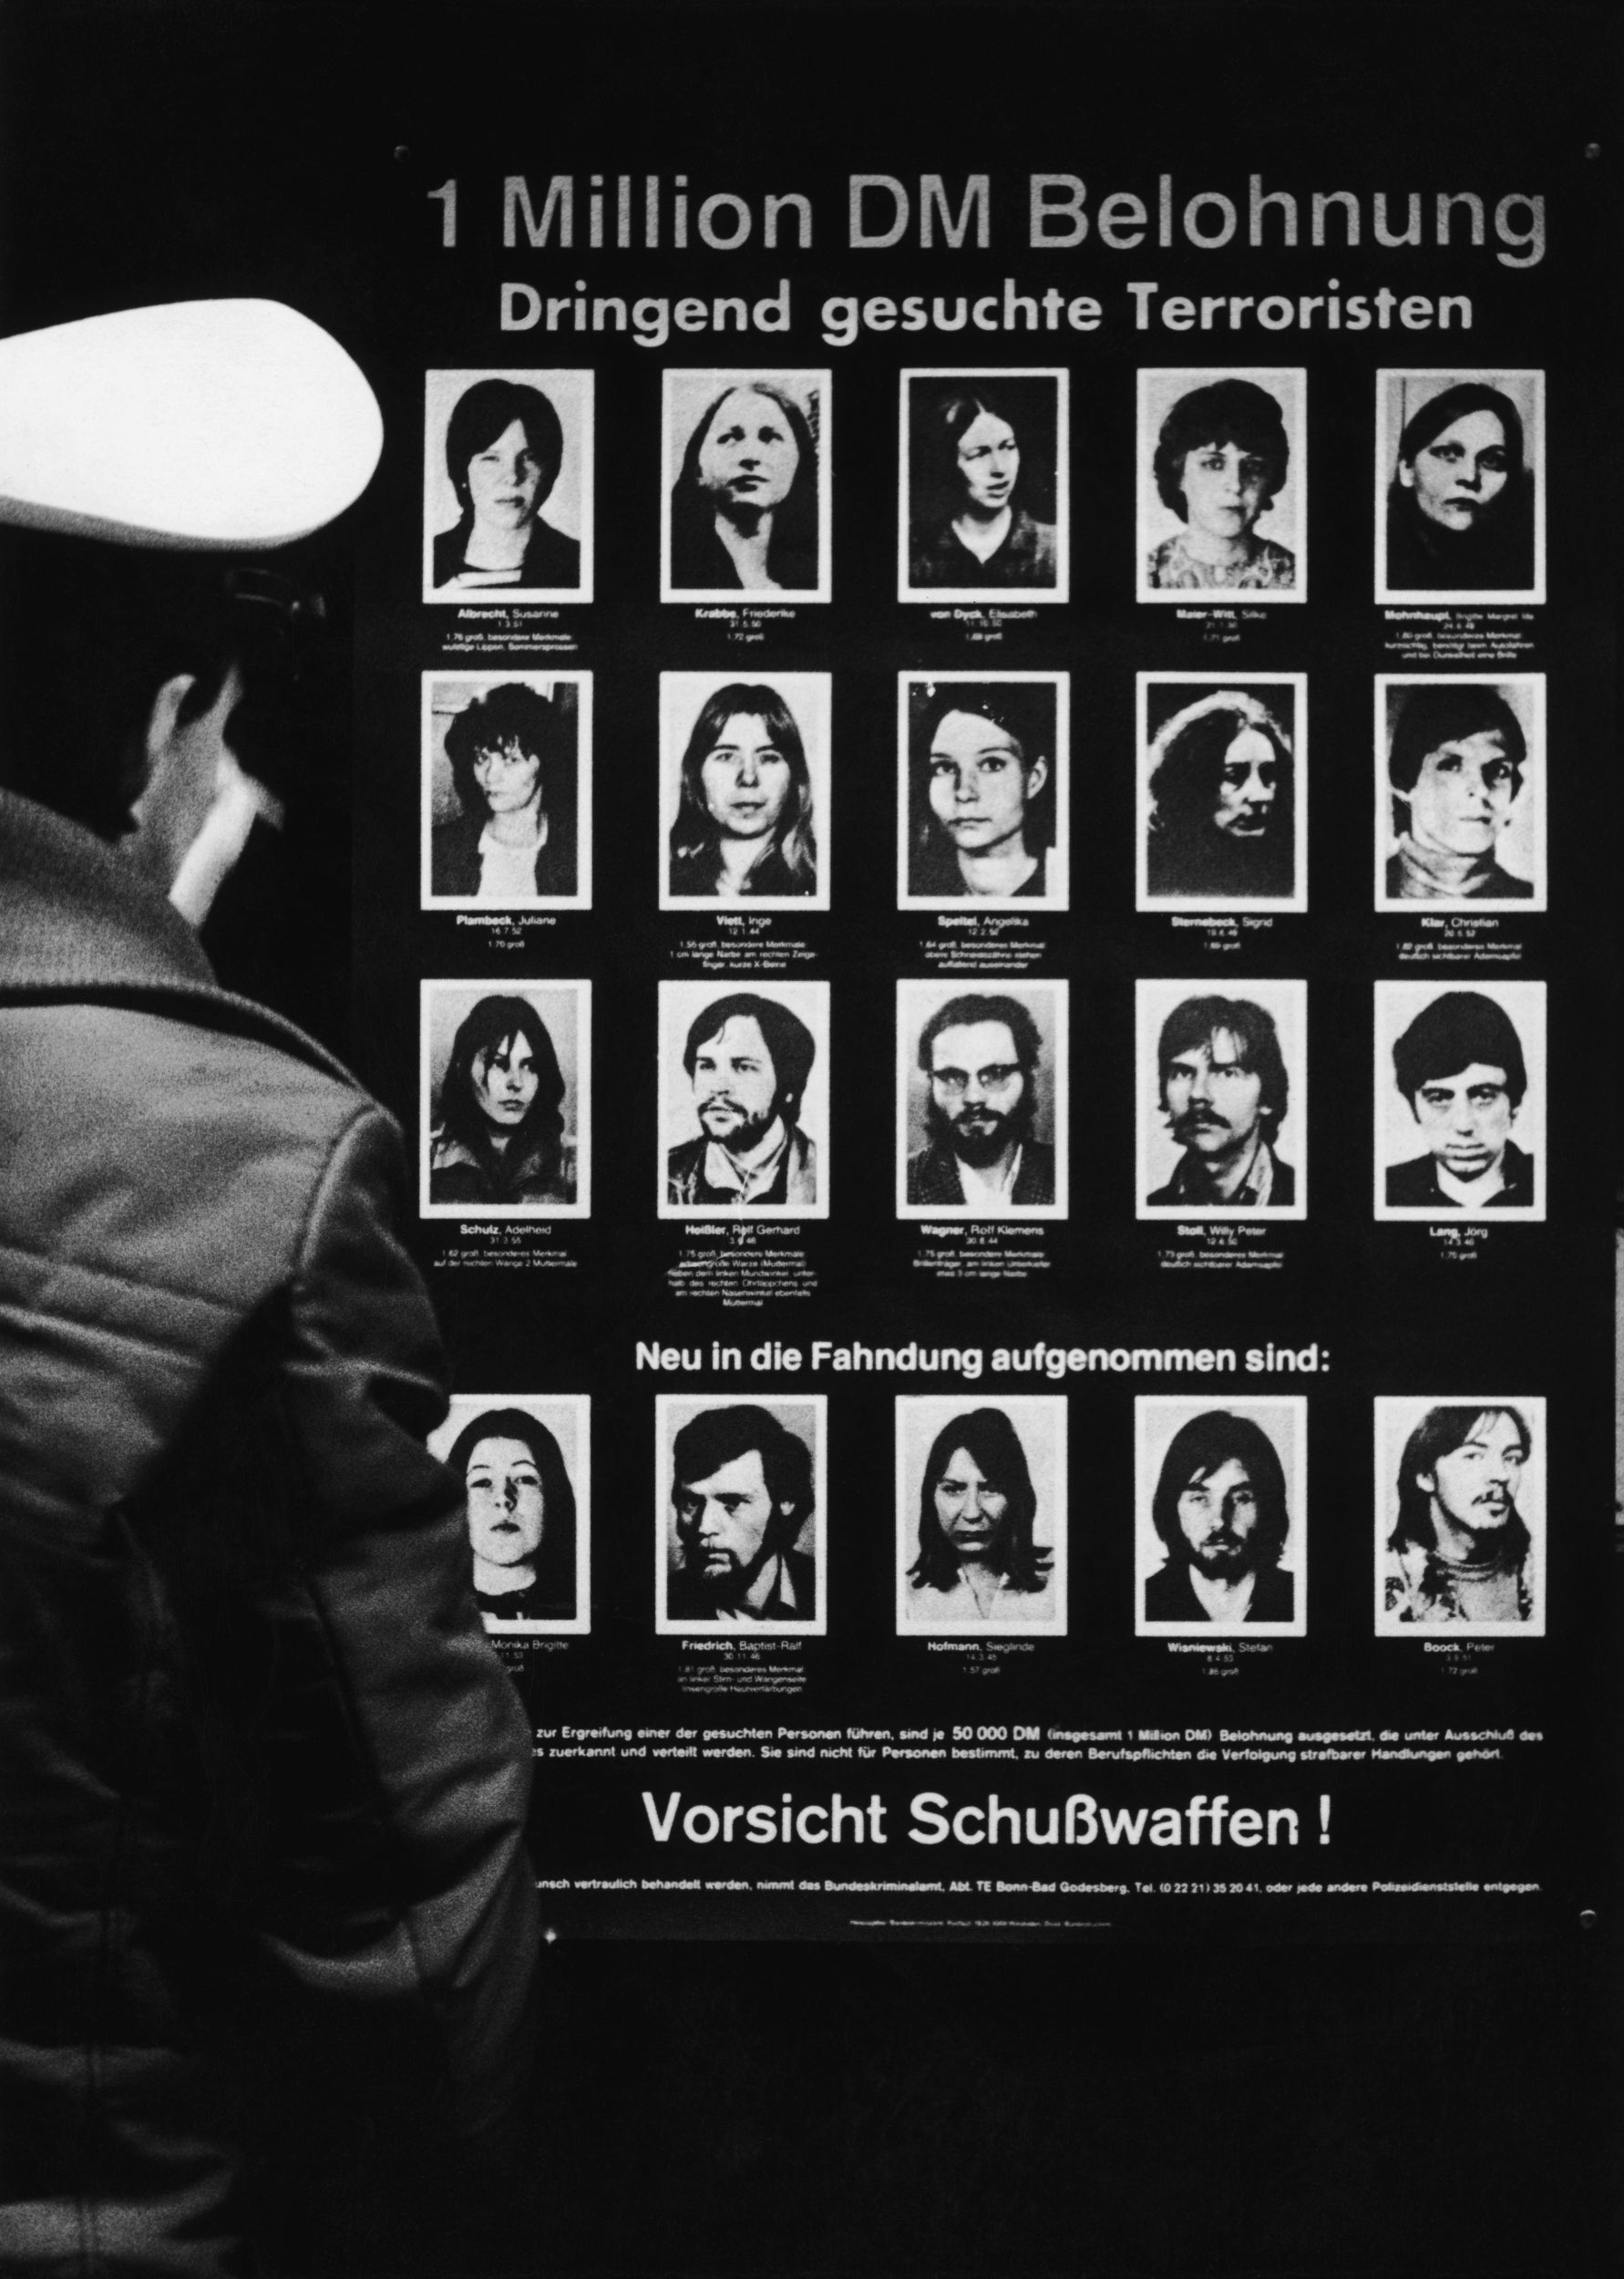 A policeman reading a wanted poster for the Baader-Meinhof Gang